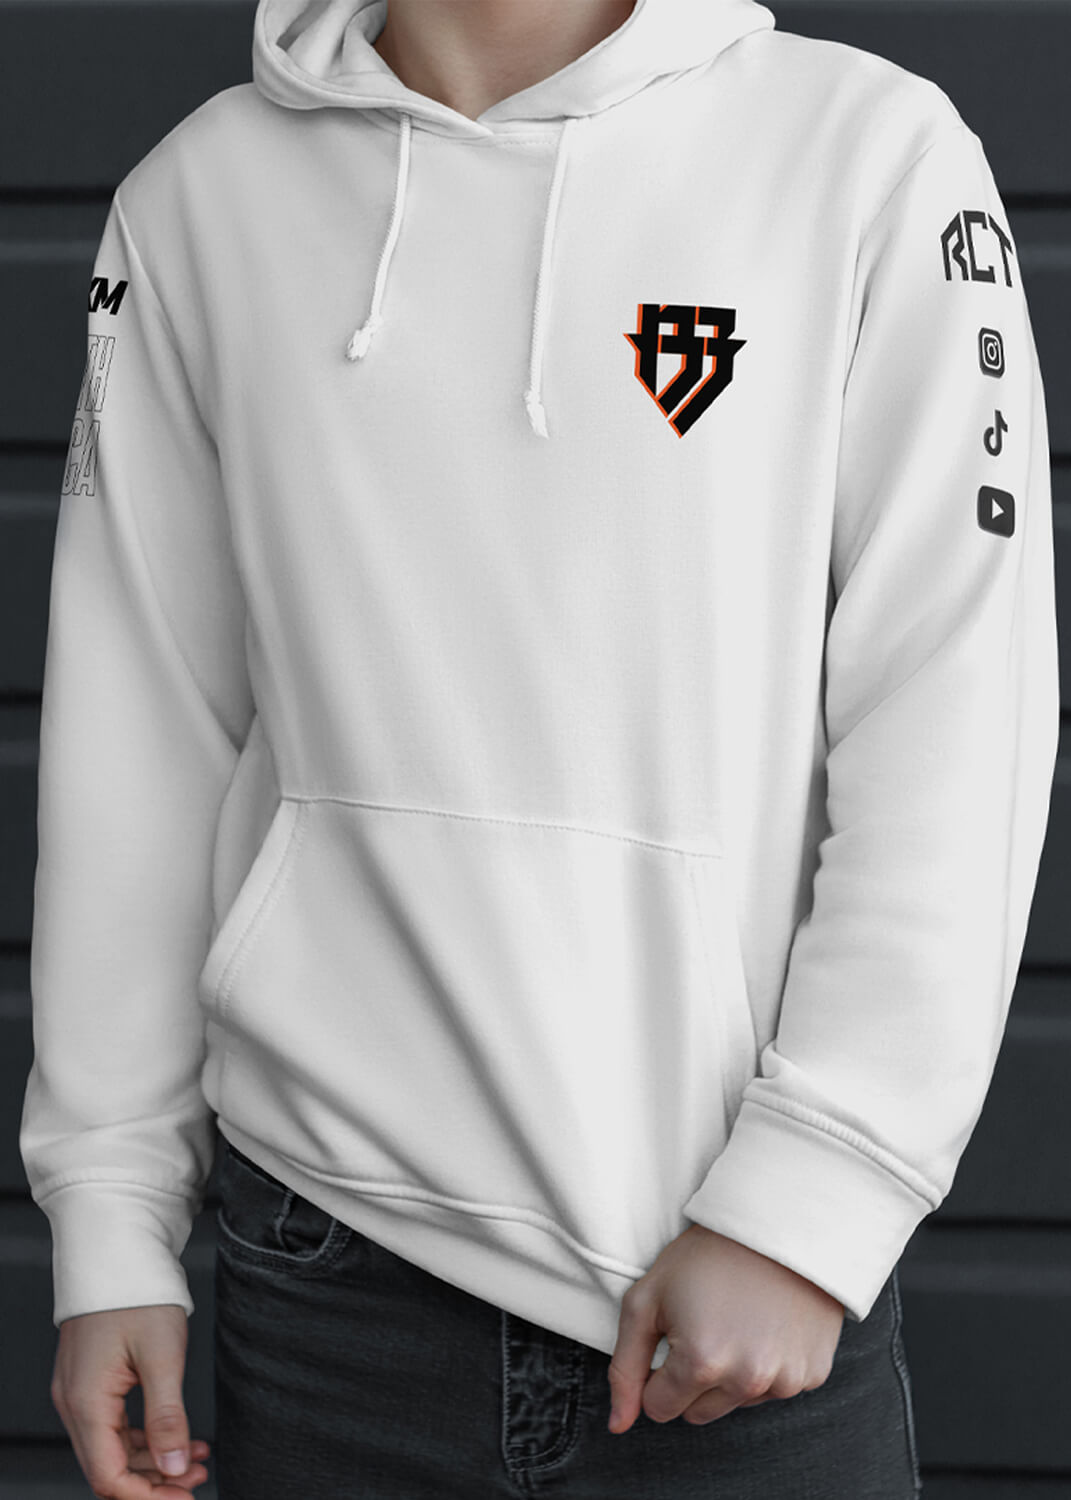 '23 White Hoodie Product Image